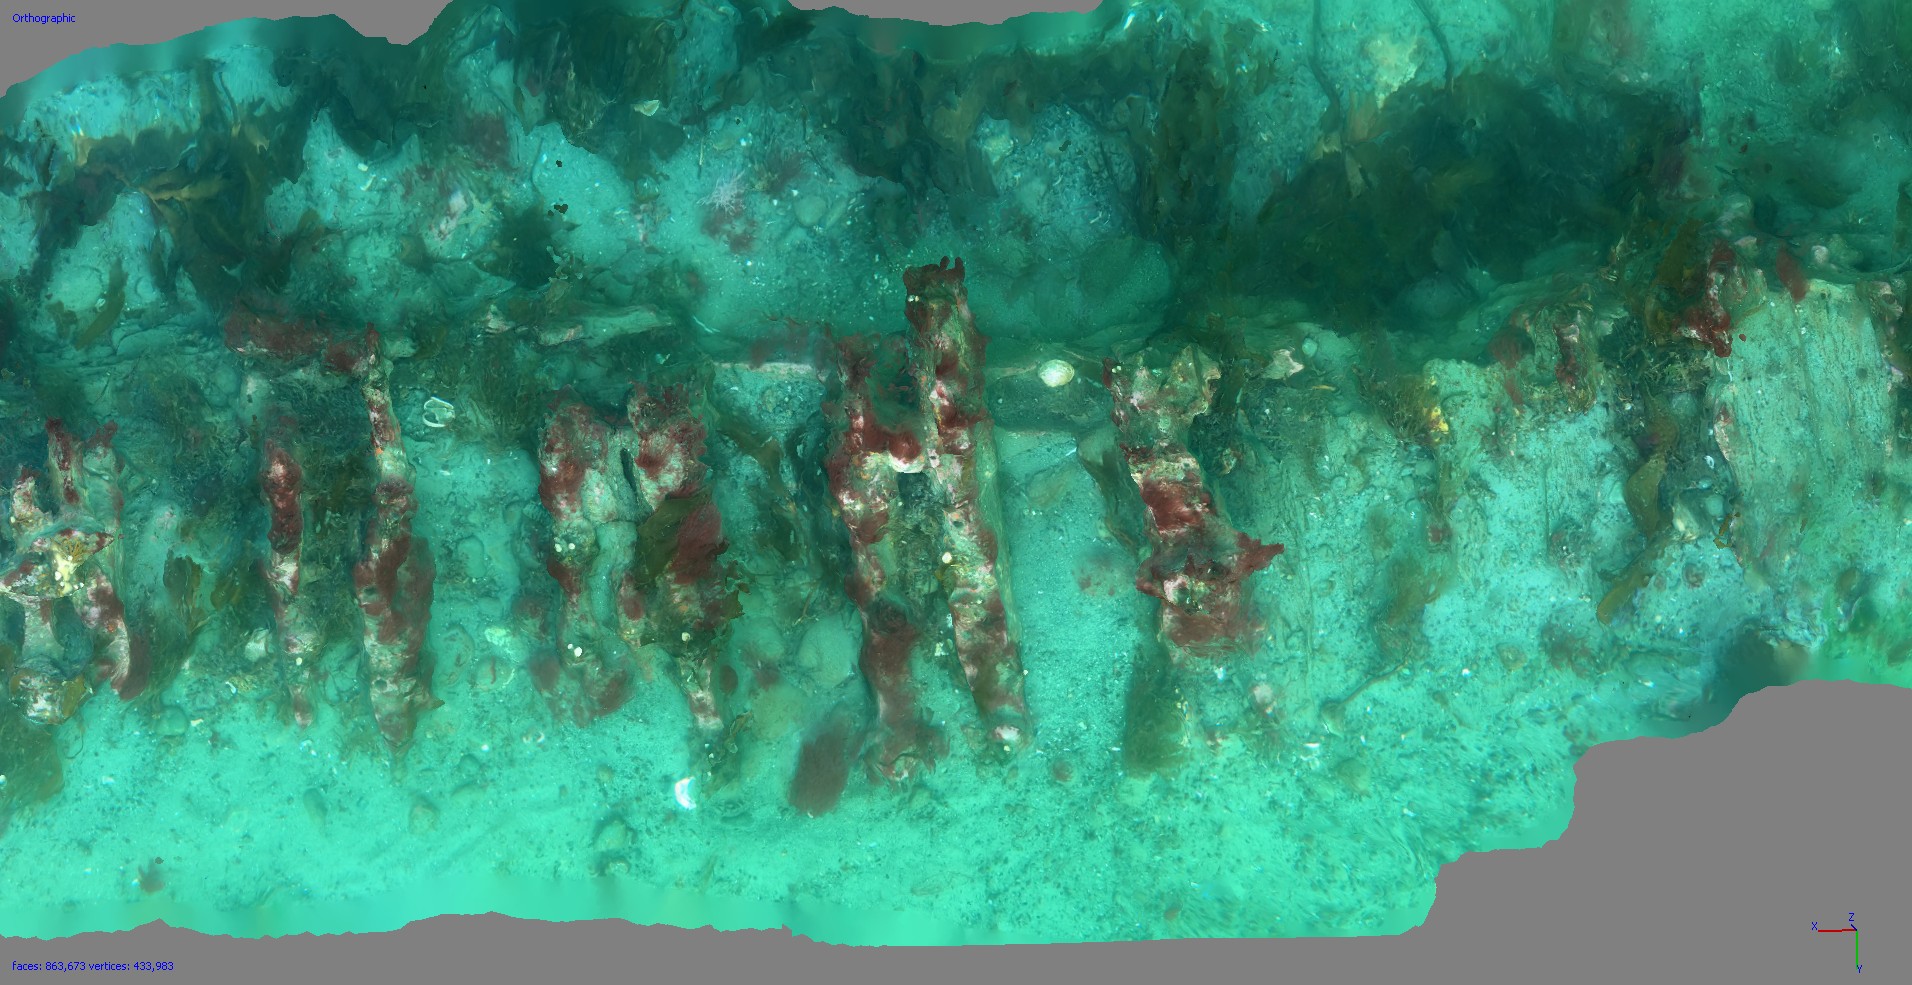 A photogrammetry image of the Surpise wreck site.